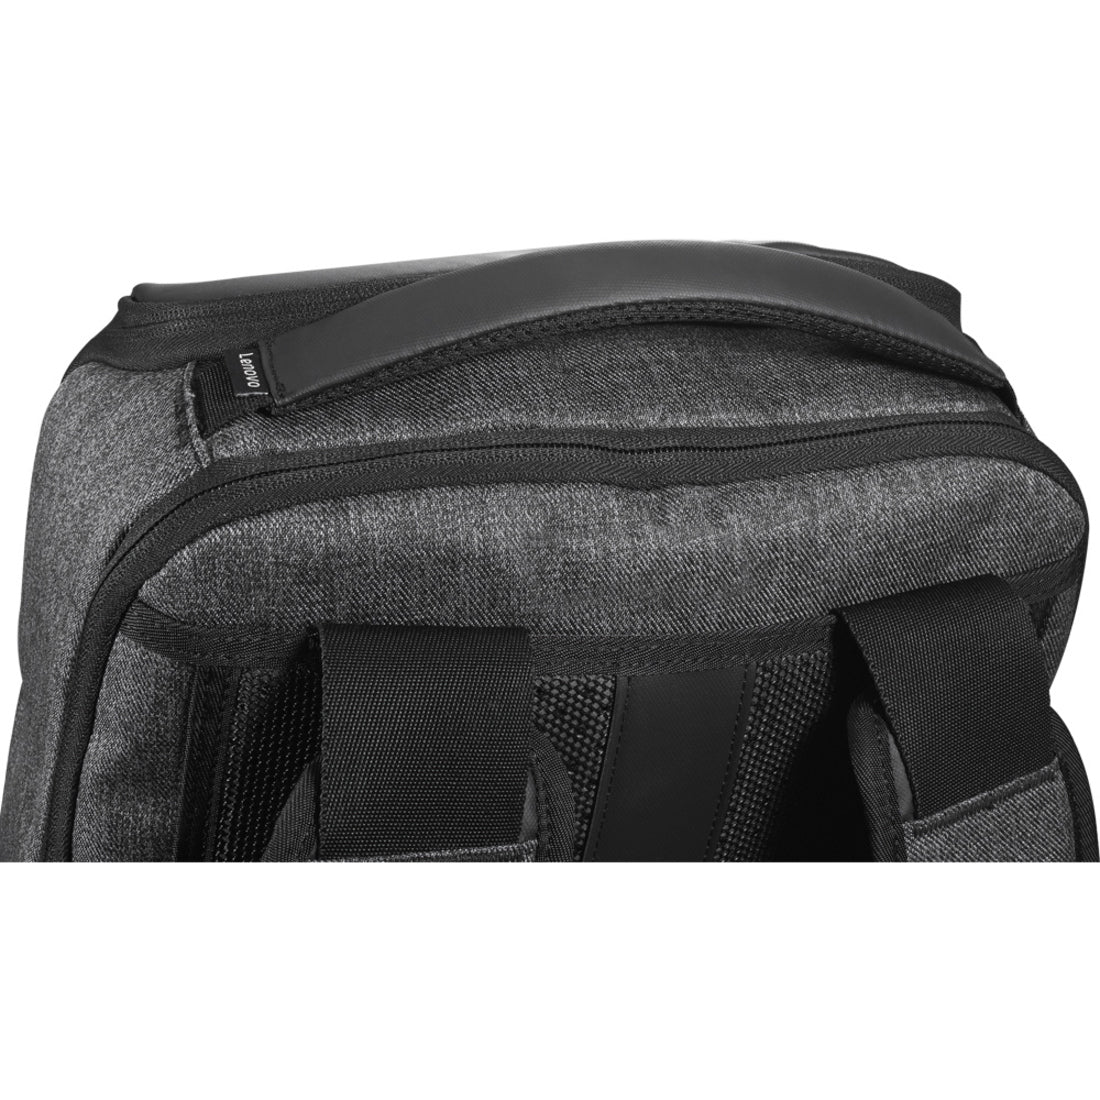 Lenovo GX40S69333 Legion 15.6" Recon Gaming Backpack, Stylish and Durable Carry Case for Notebook, Gaming Gear, and More